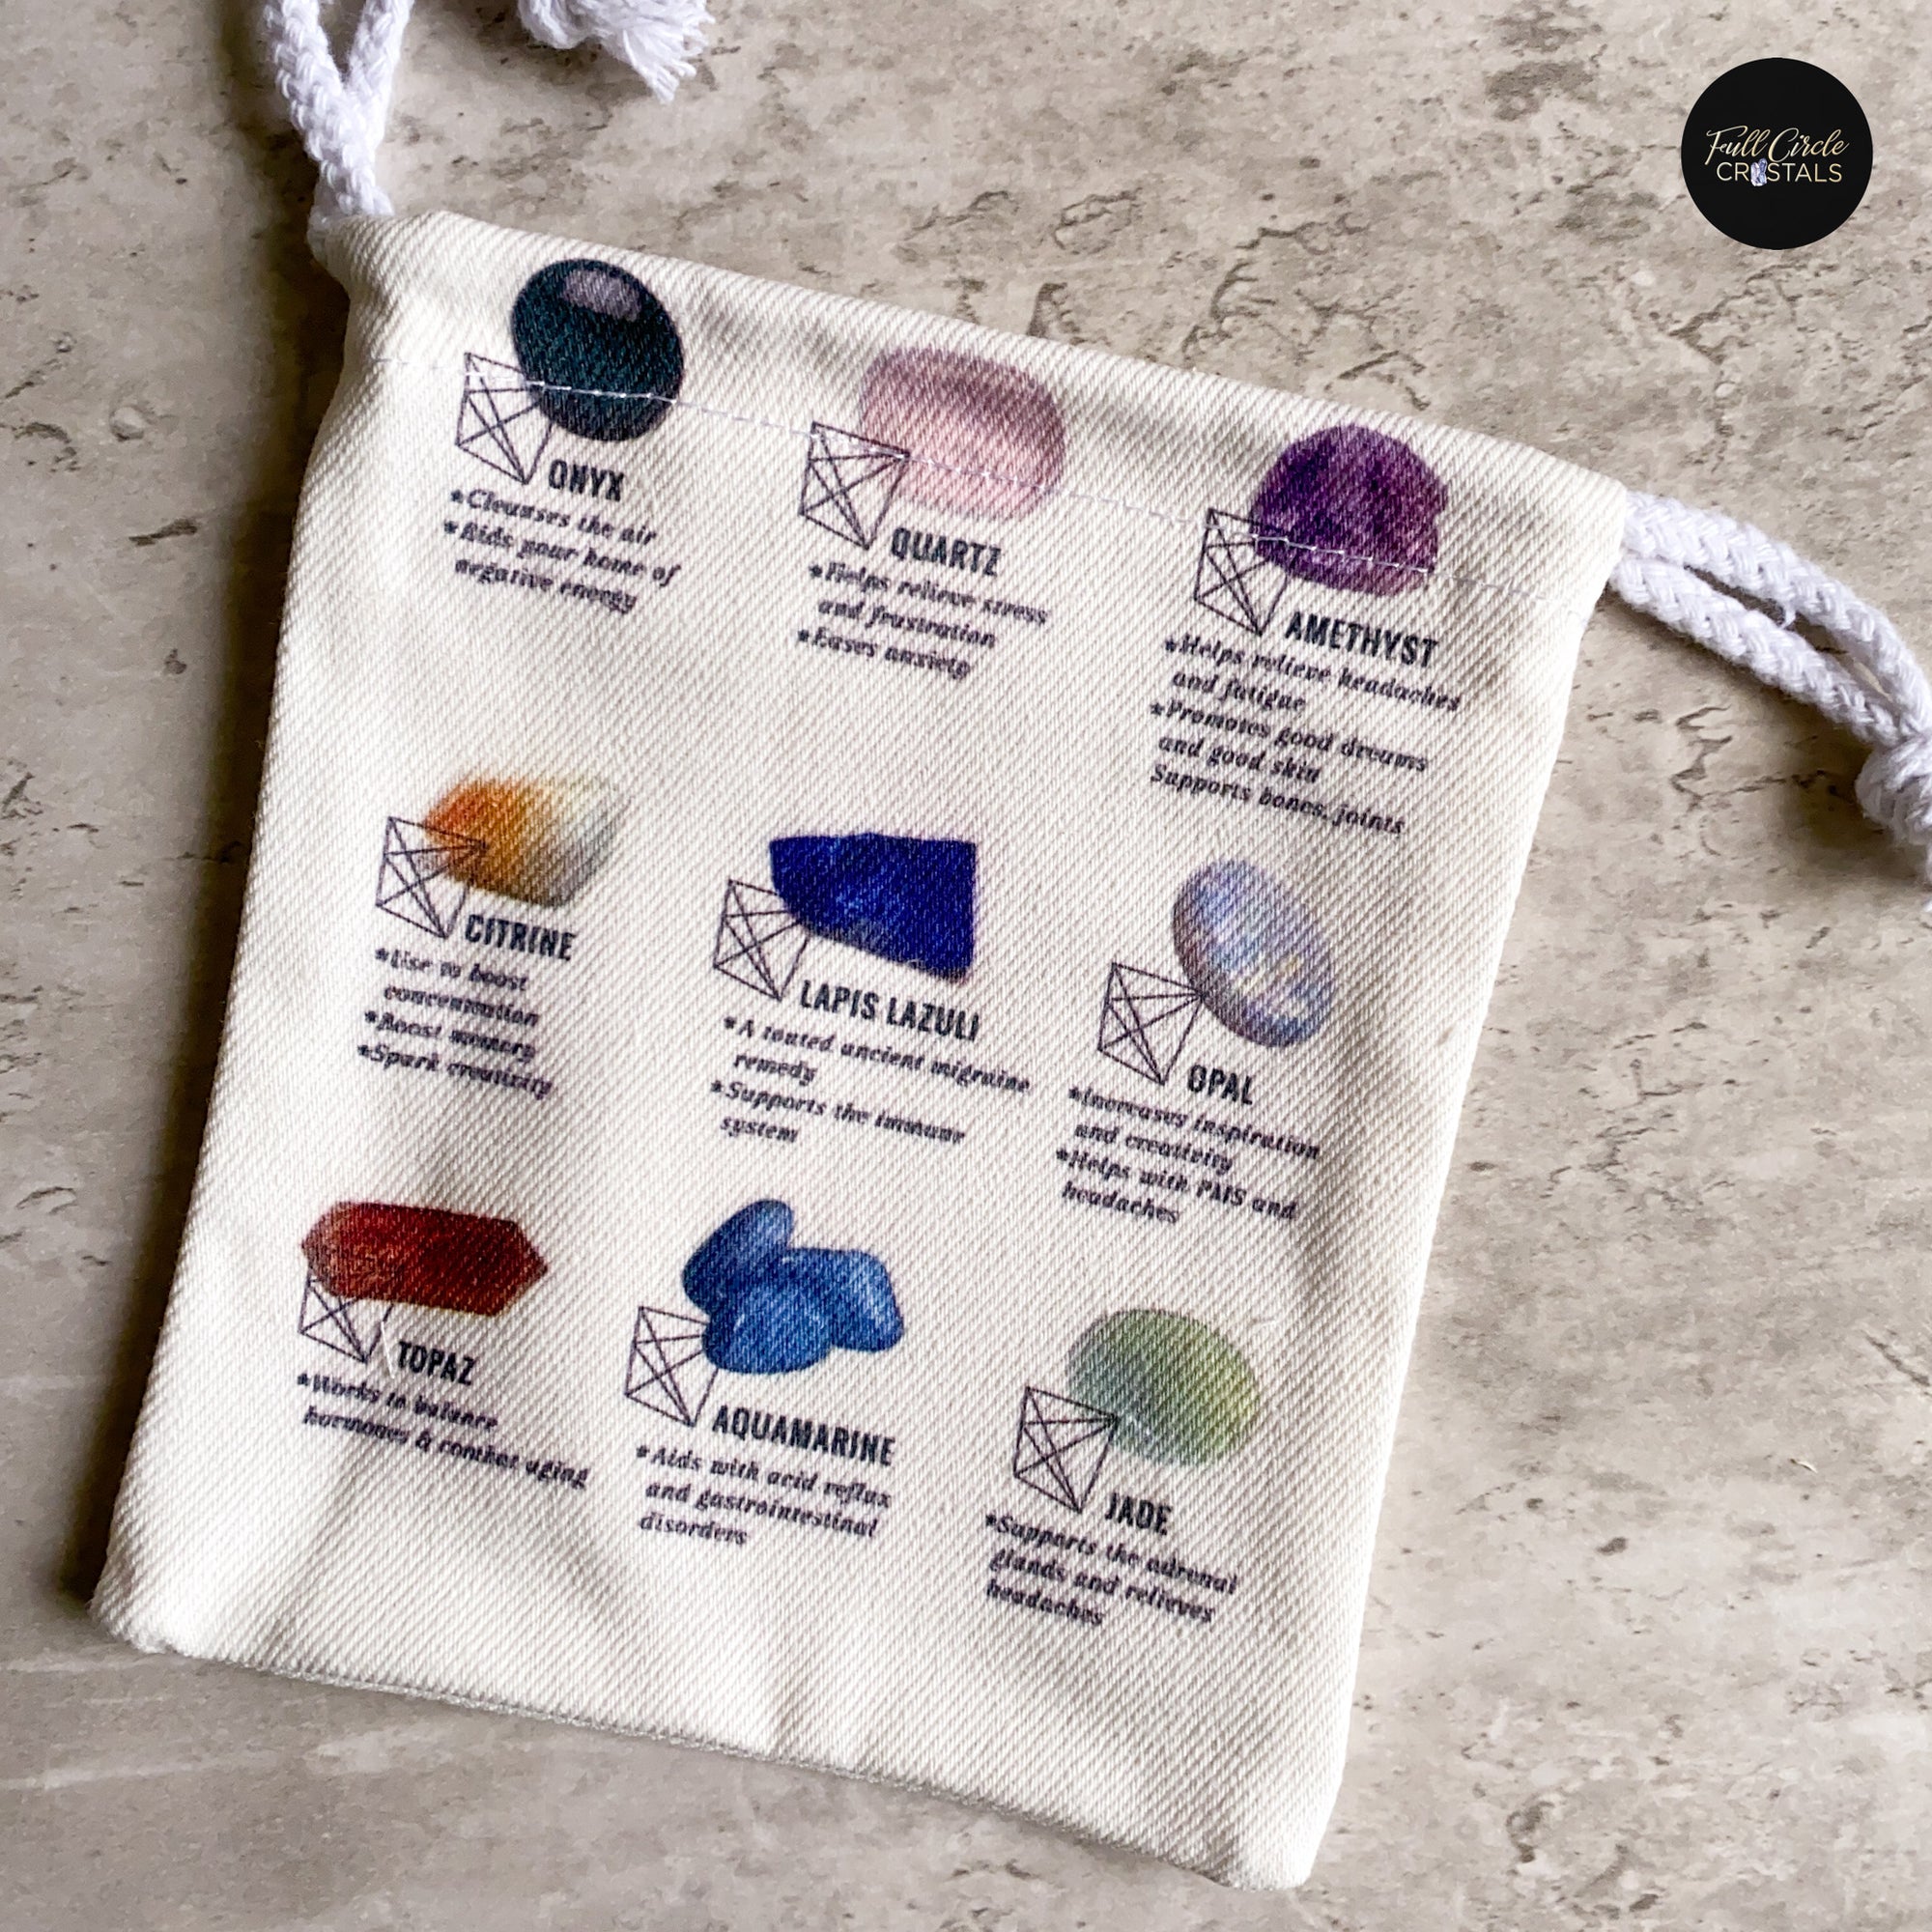 9 Crystals Cotton Pouch